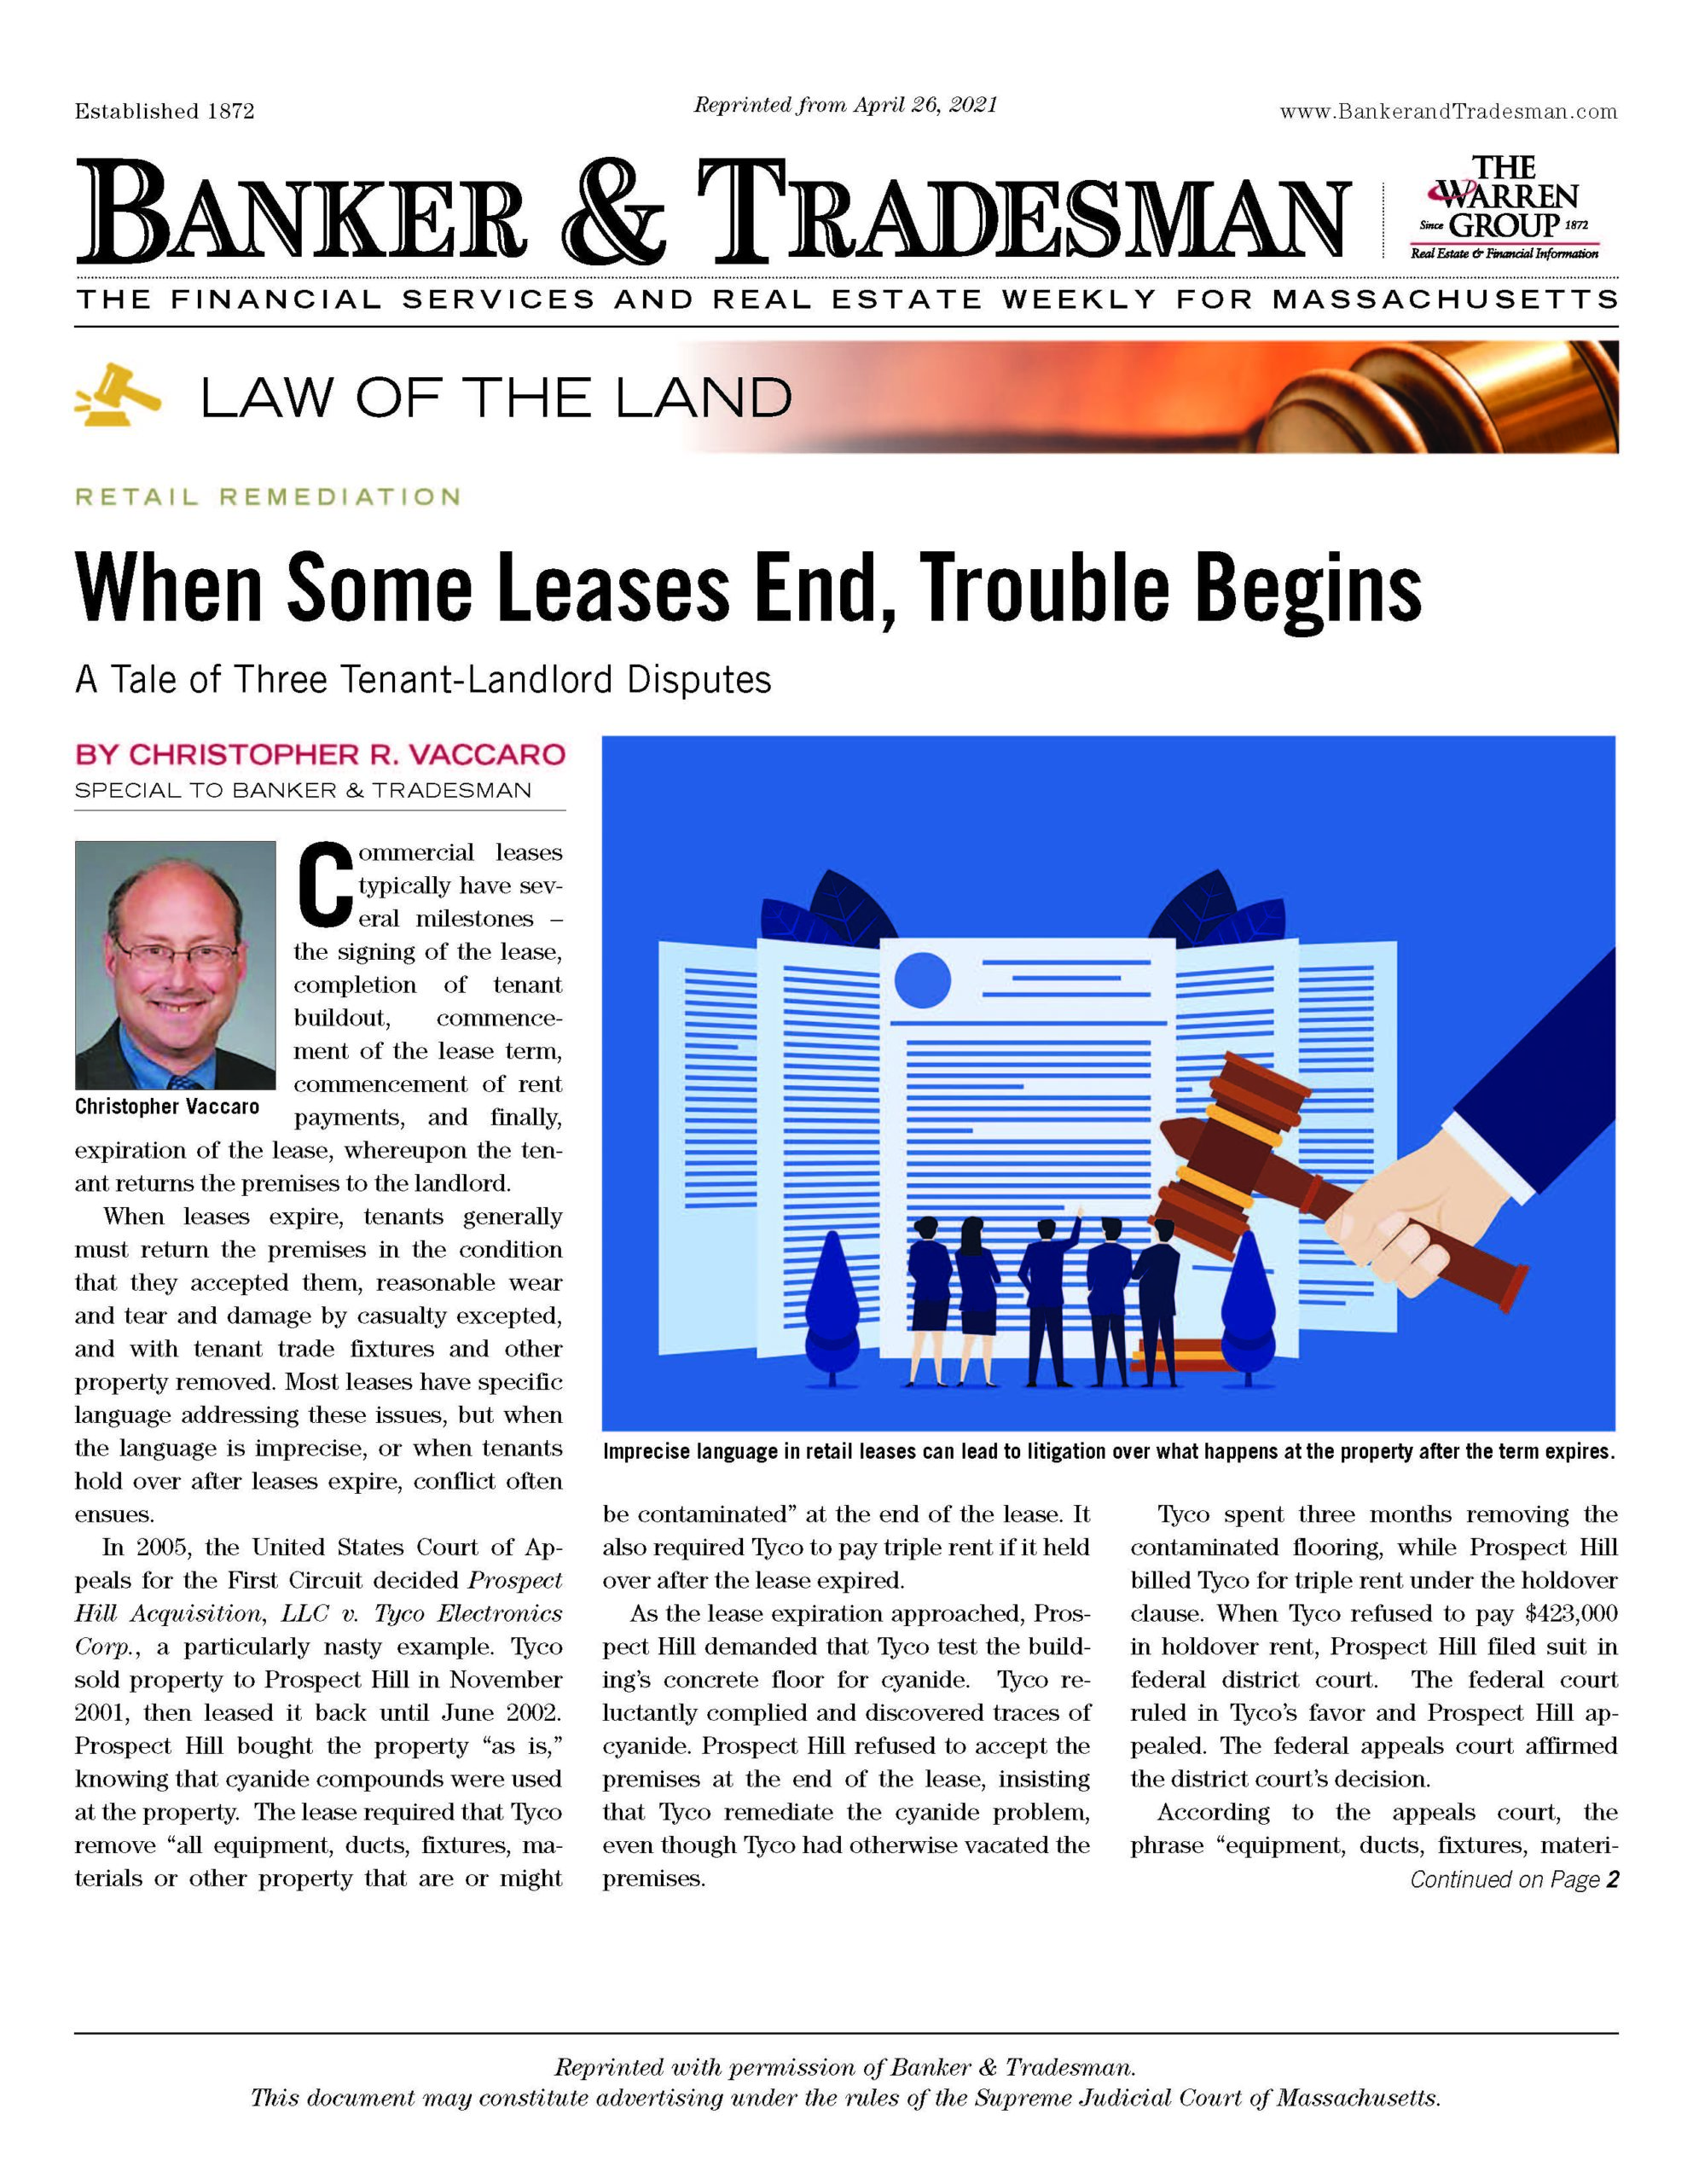 When Some Leases End, Trouble Begins